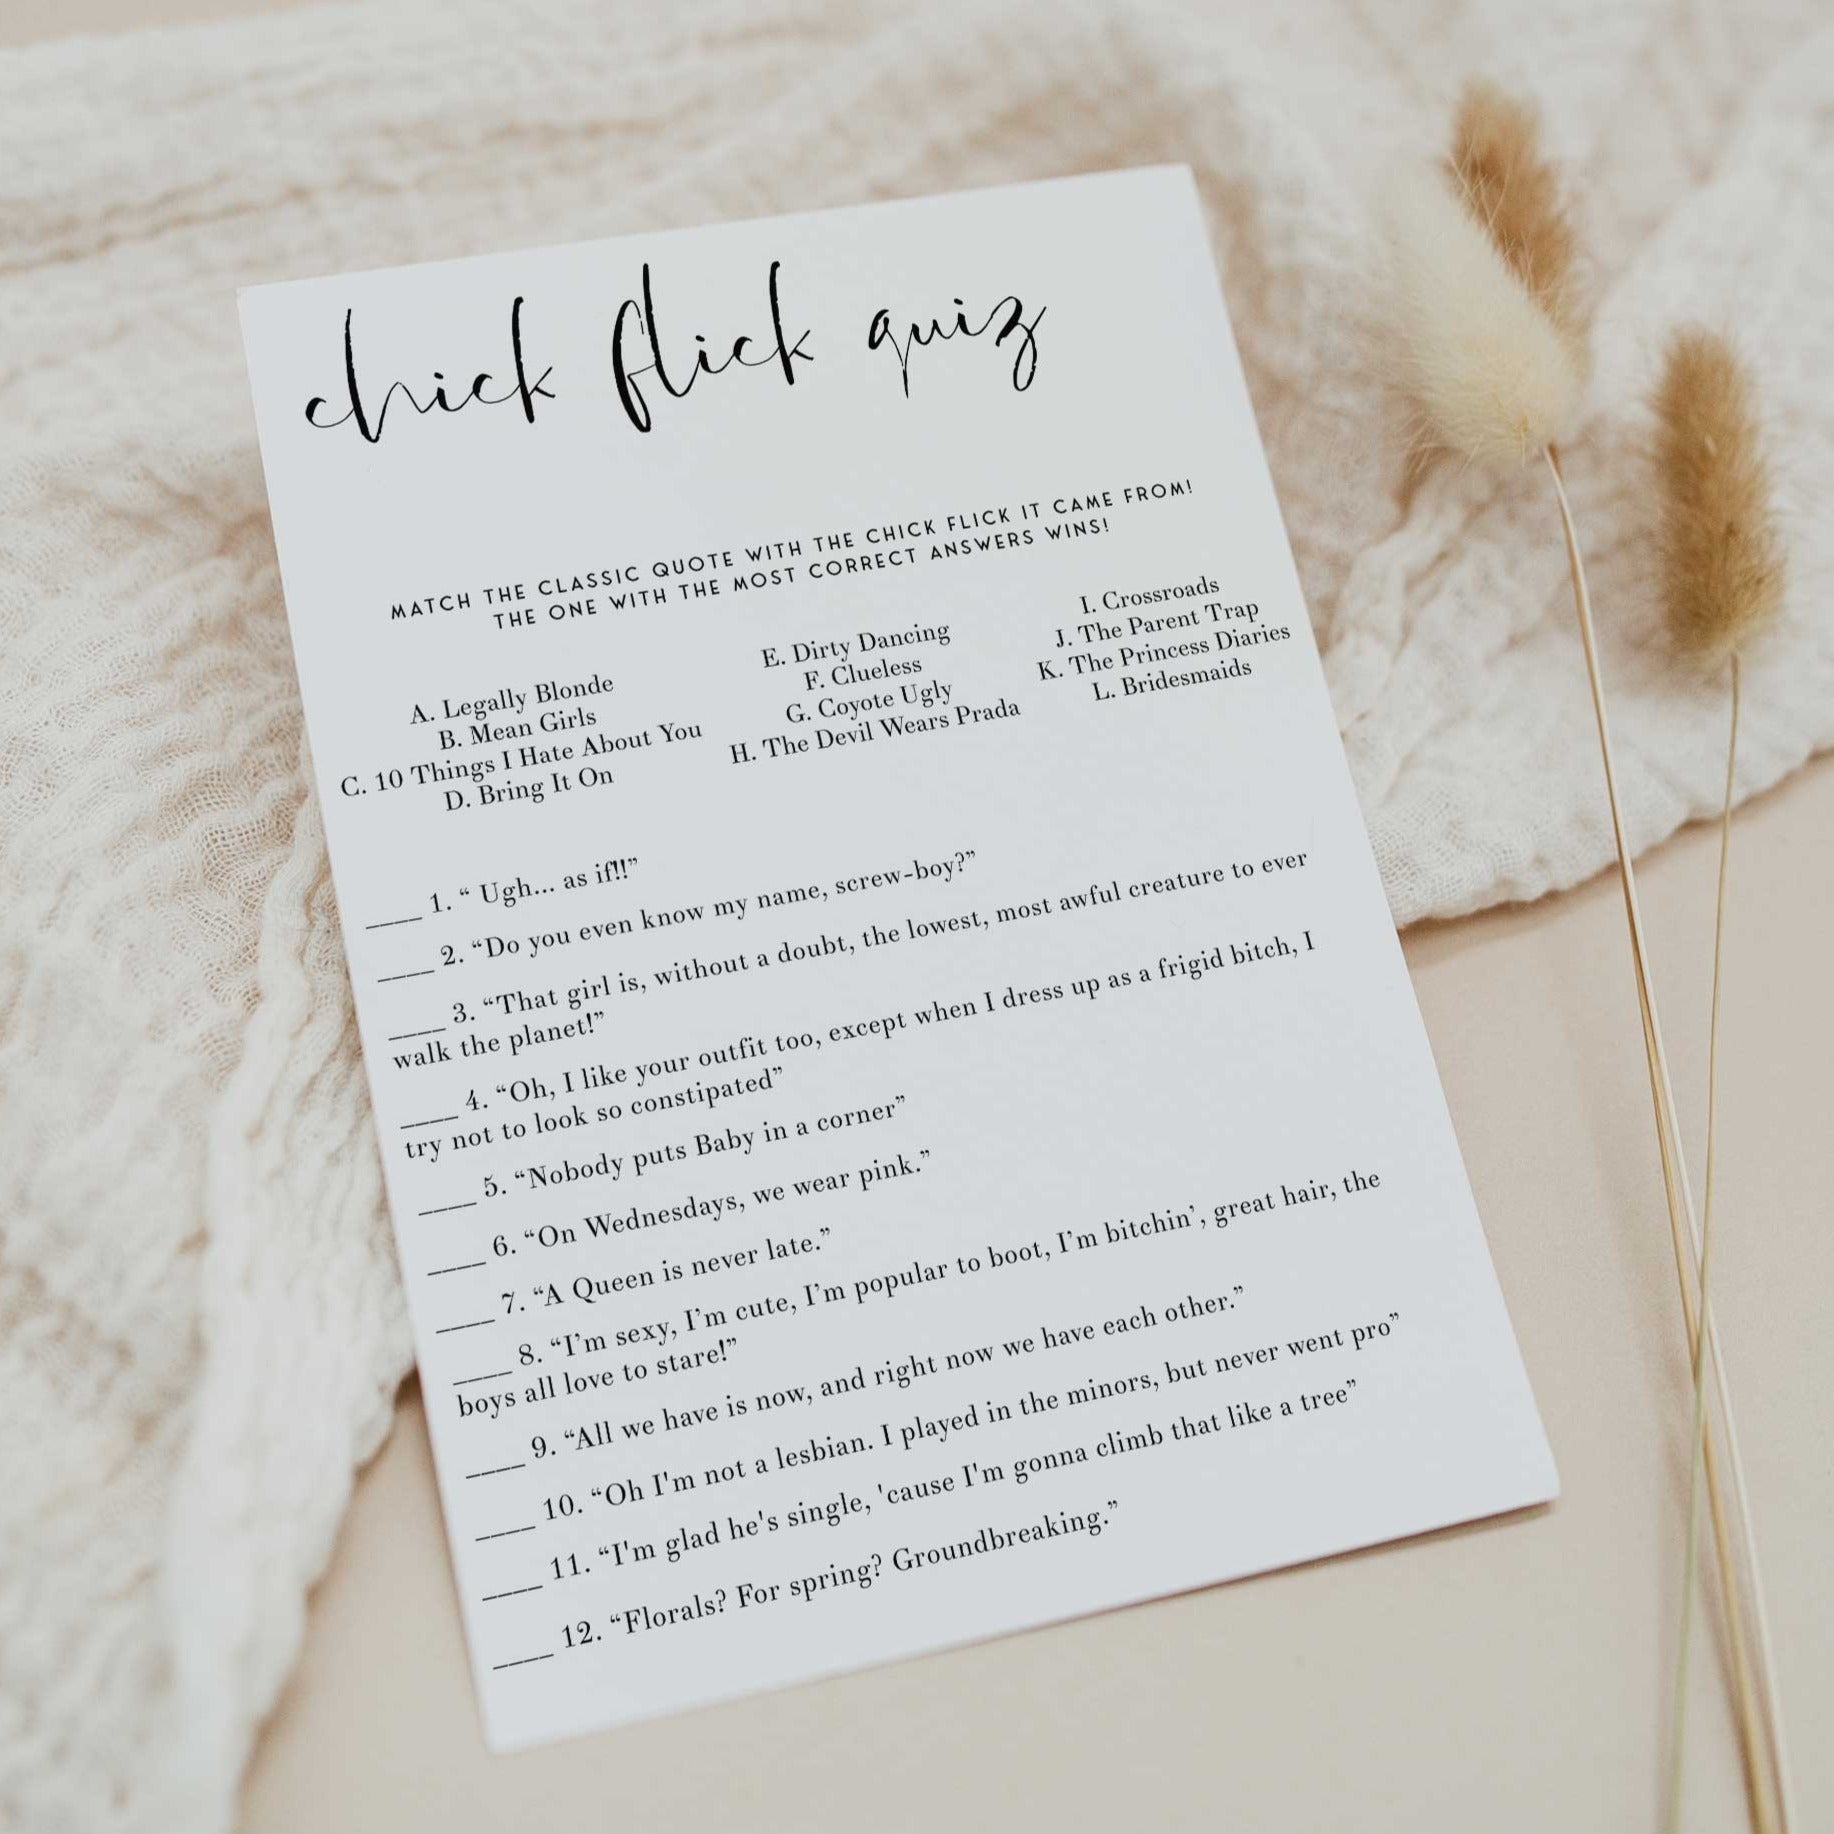 Fully editable and printable bridal shower chick flick quiz game with a modern minimalist design. Perfect for a modern simple bridal shower themed party